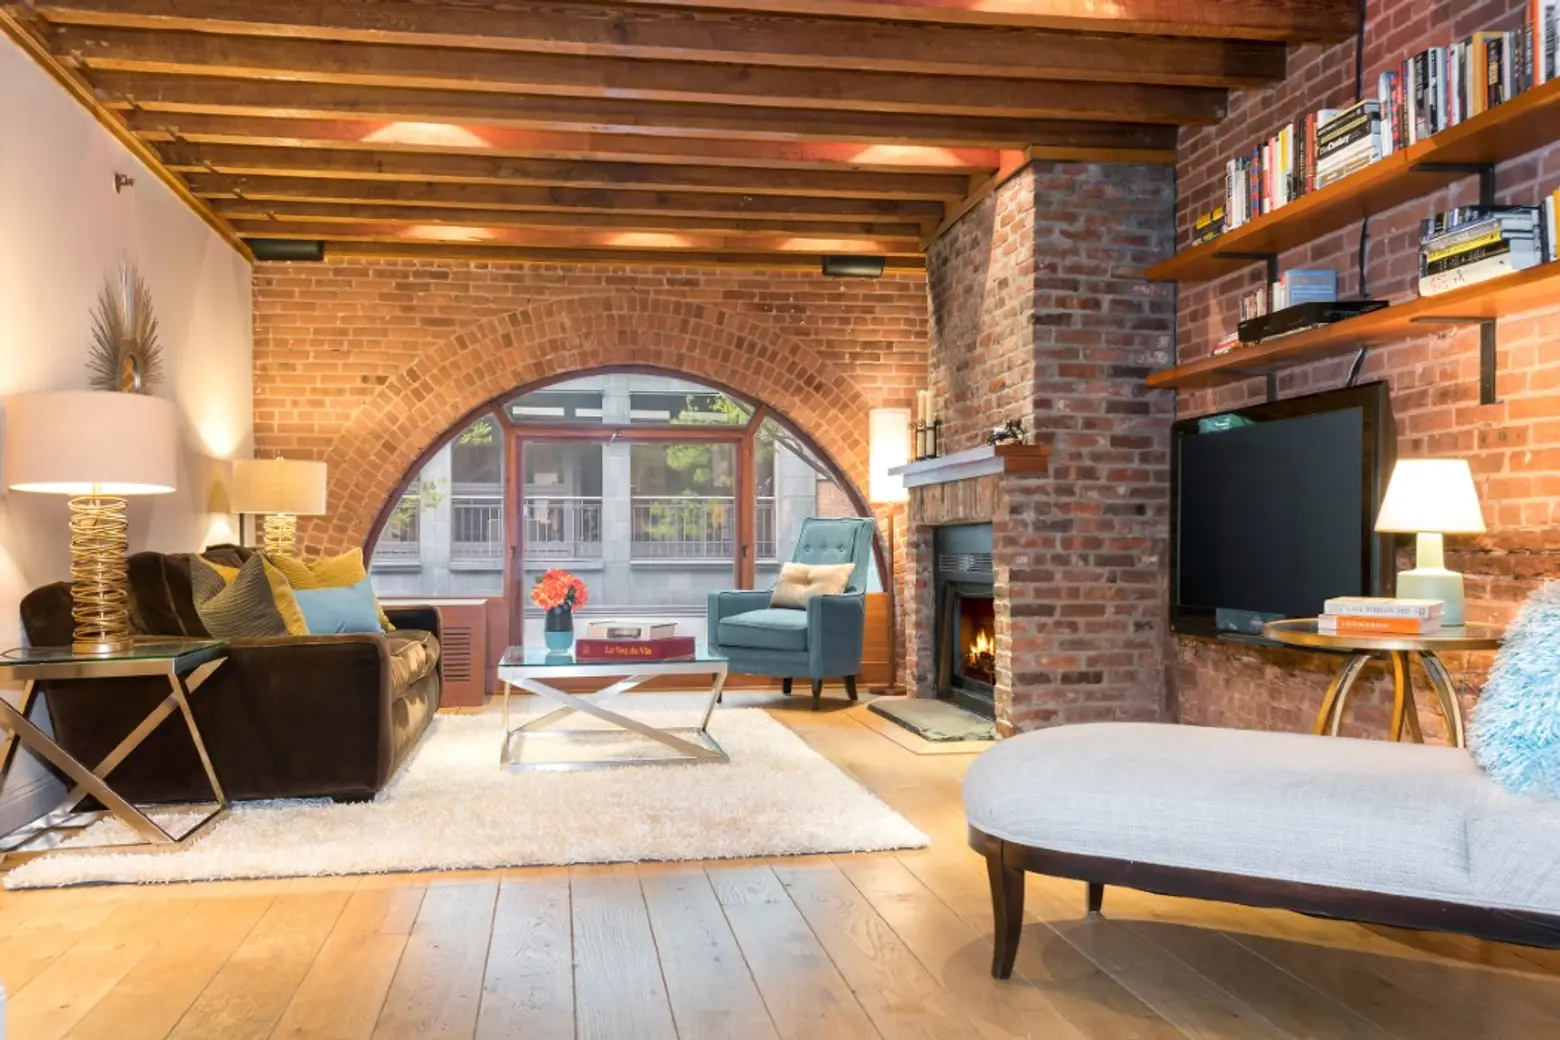 $2.8M Condo at Former Greenwich Village Horse Stable Boasts Great Windows and Exposed Brick